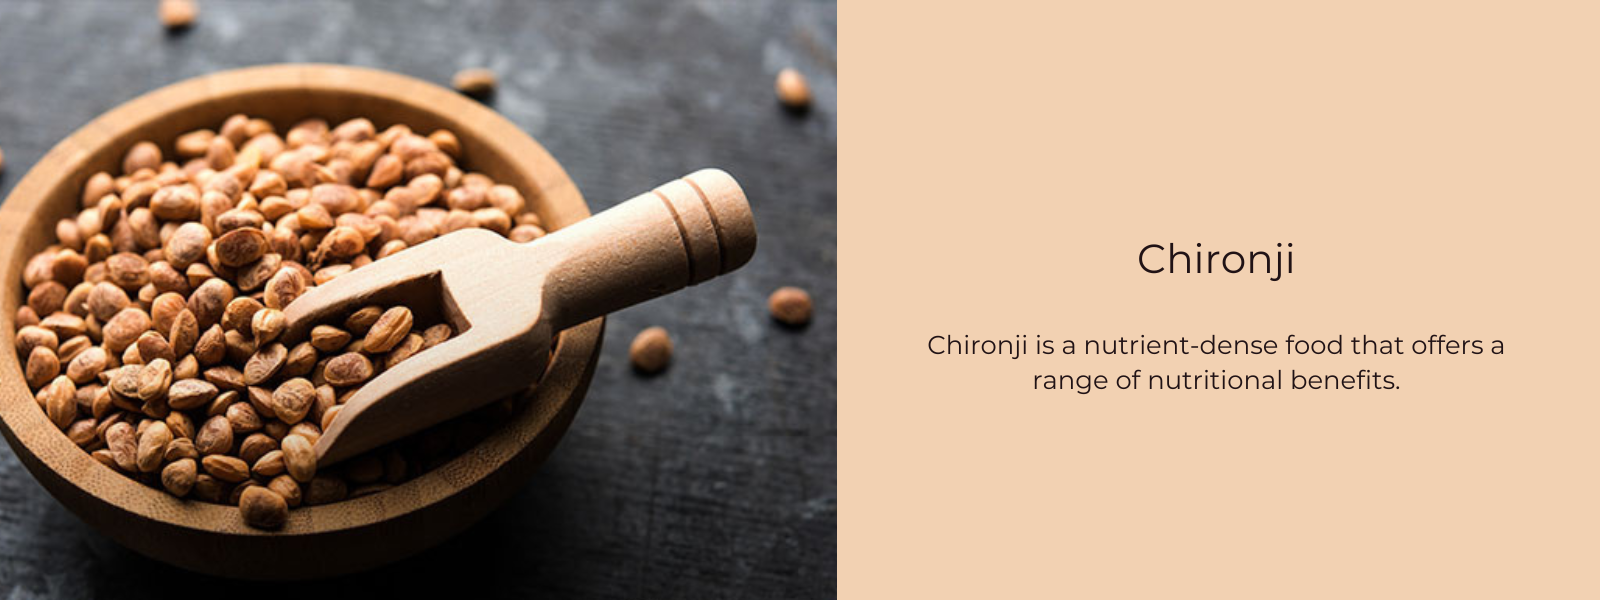 Chironji - Health Benefits, Uses and Important Facts